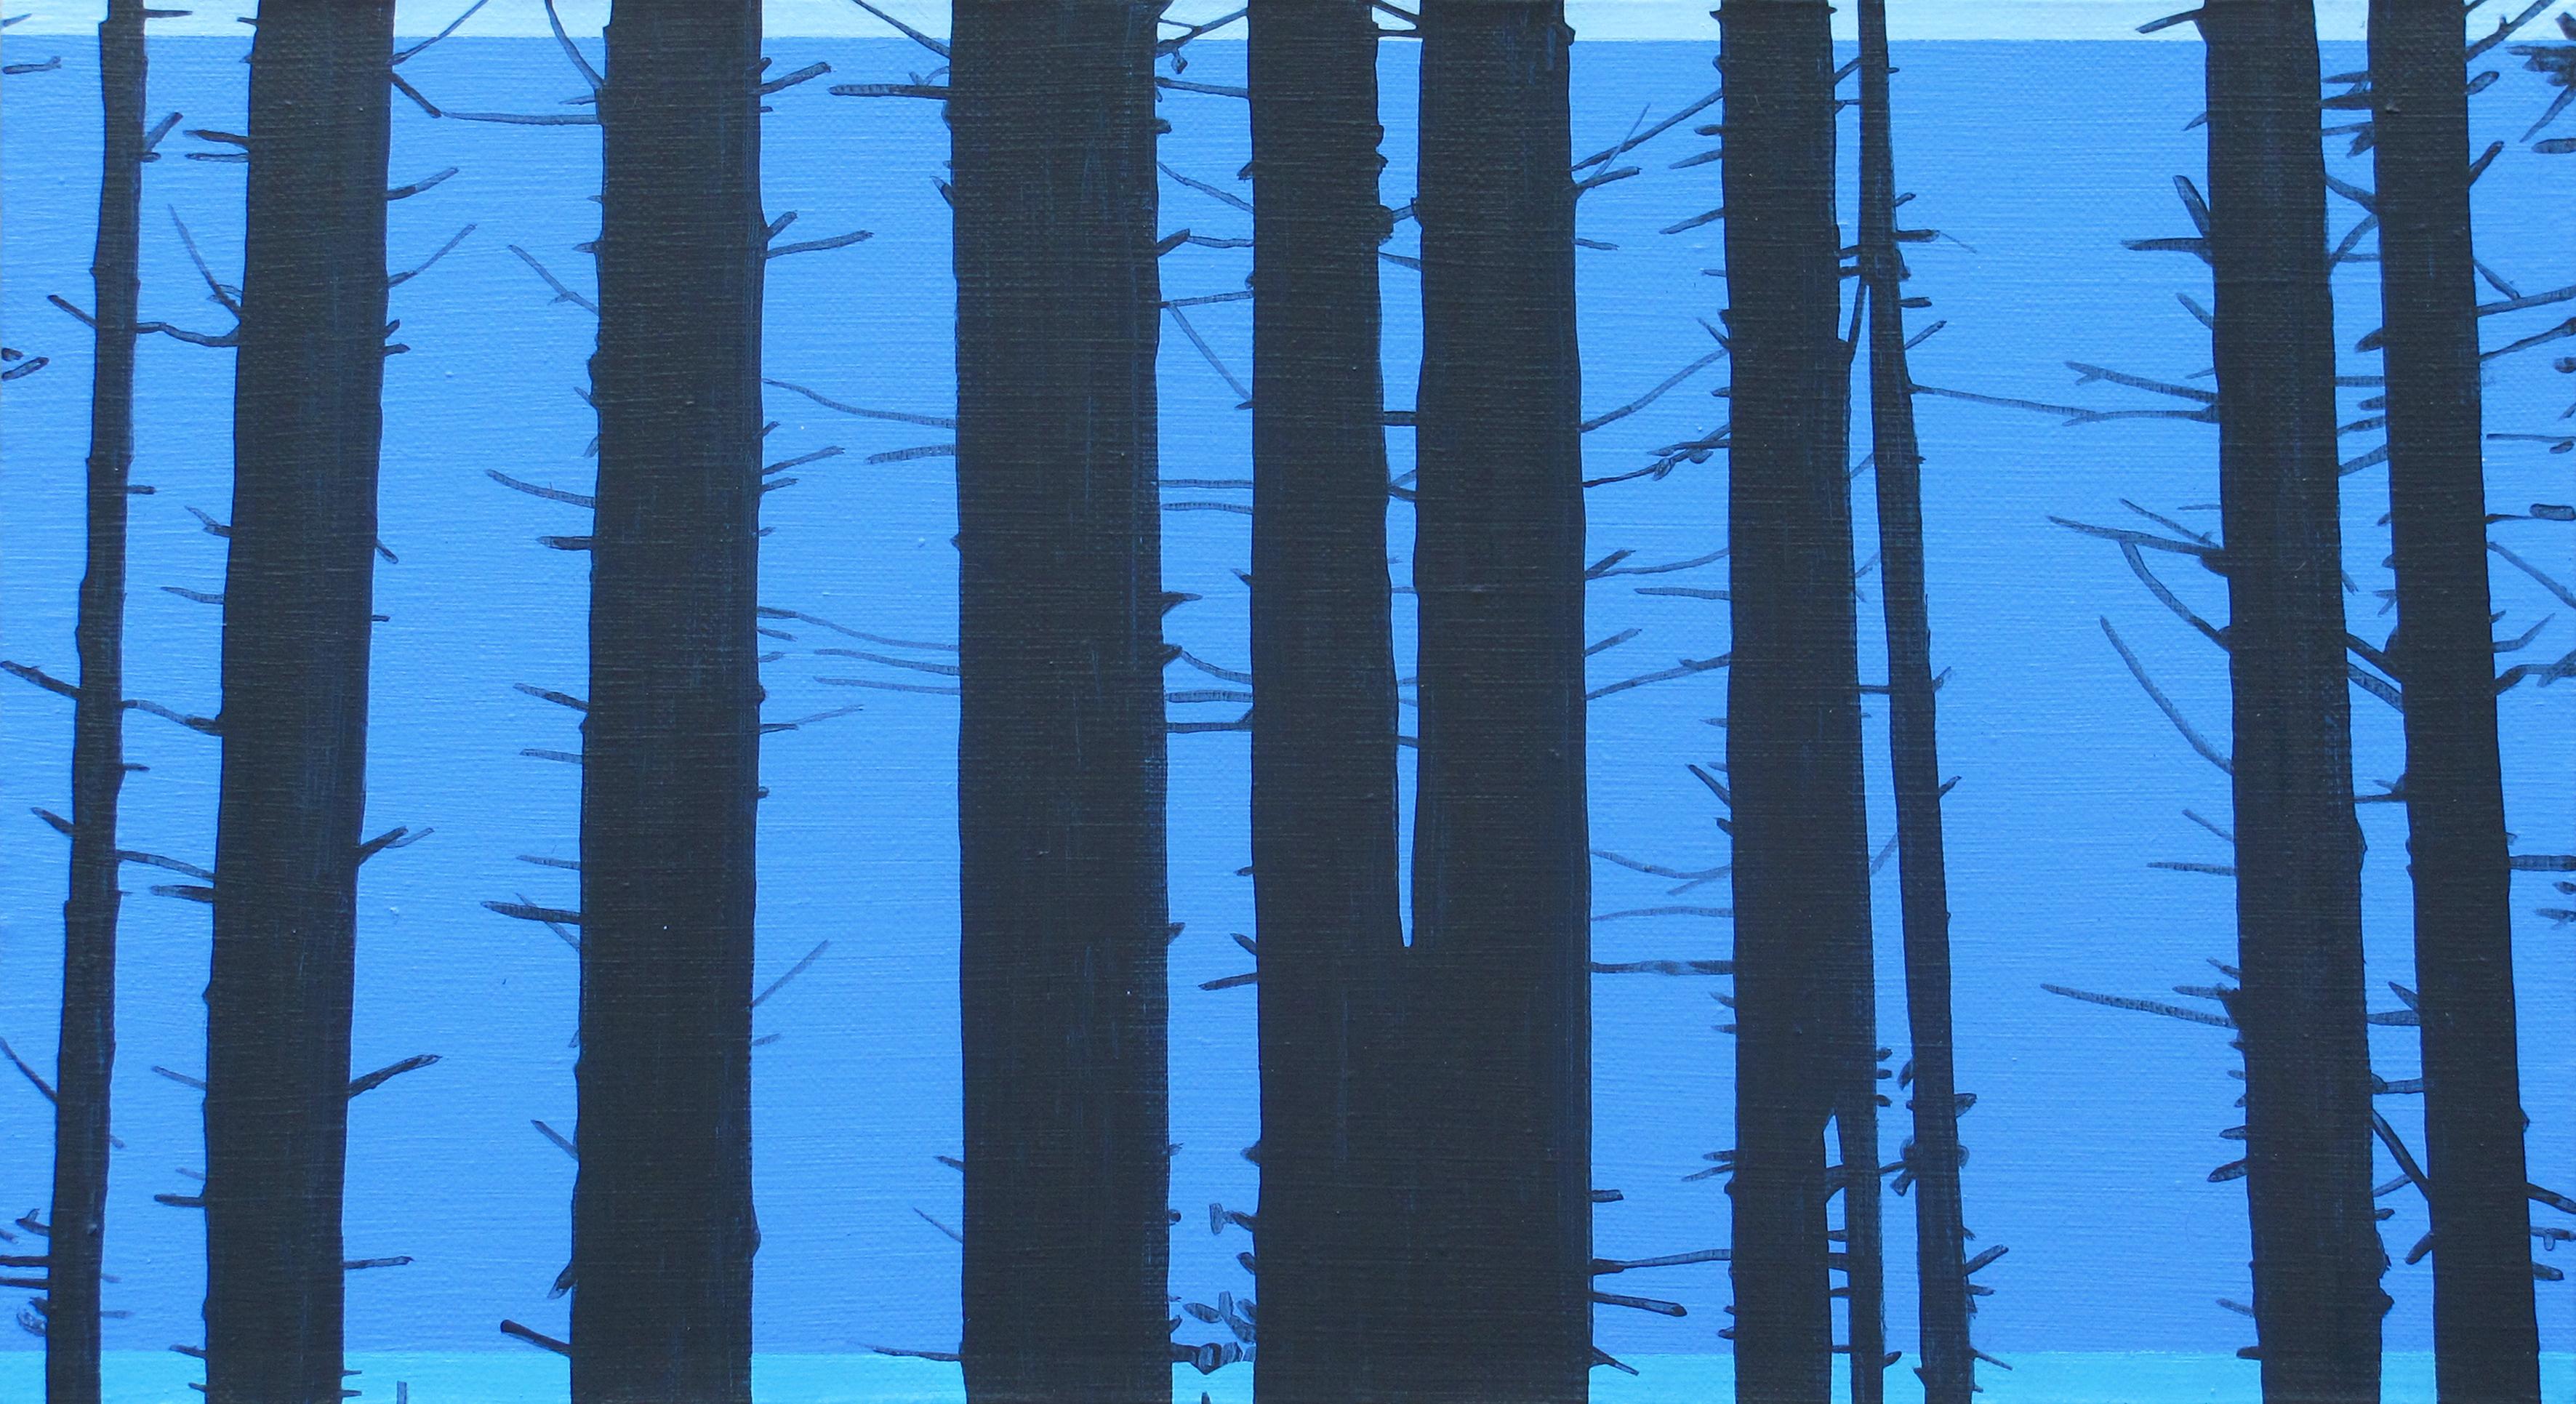 Trees 21 October 14:15, Modern Landscape Painting, Minimalistic, Abstract,Forest